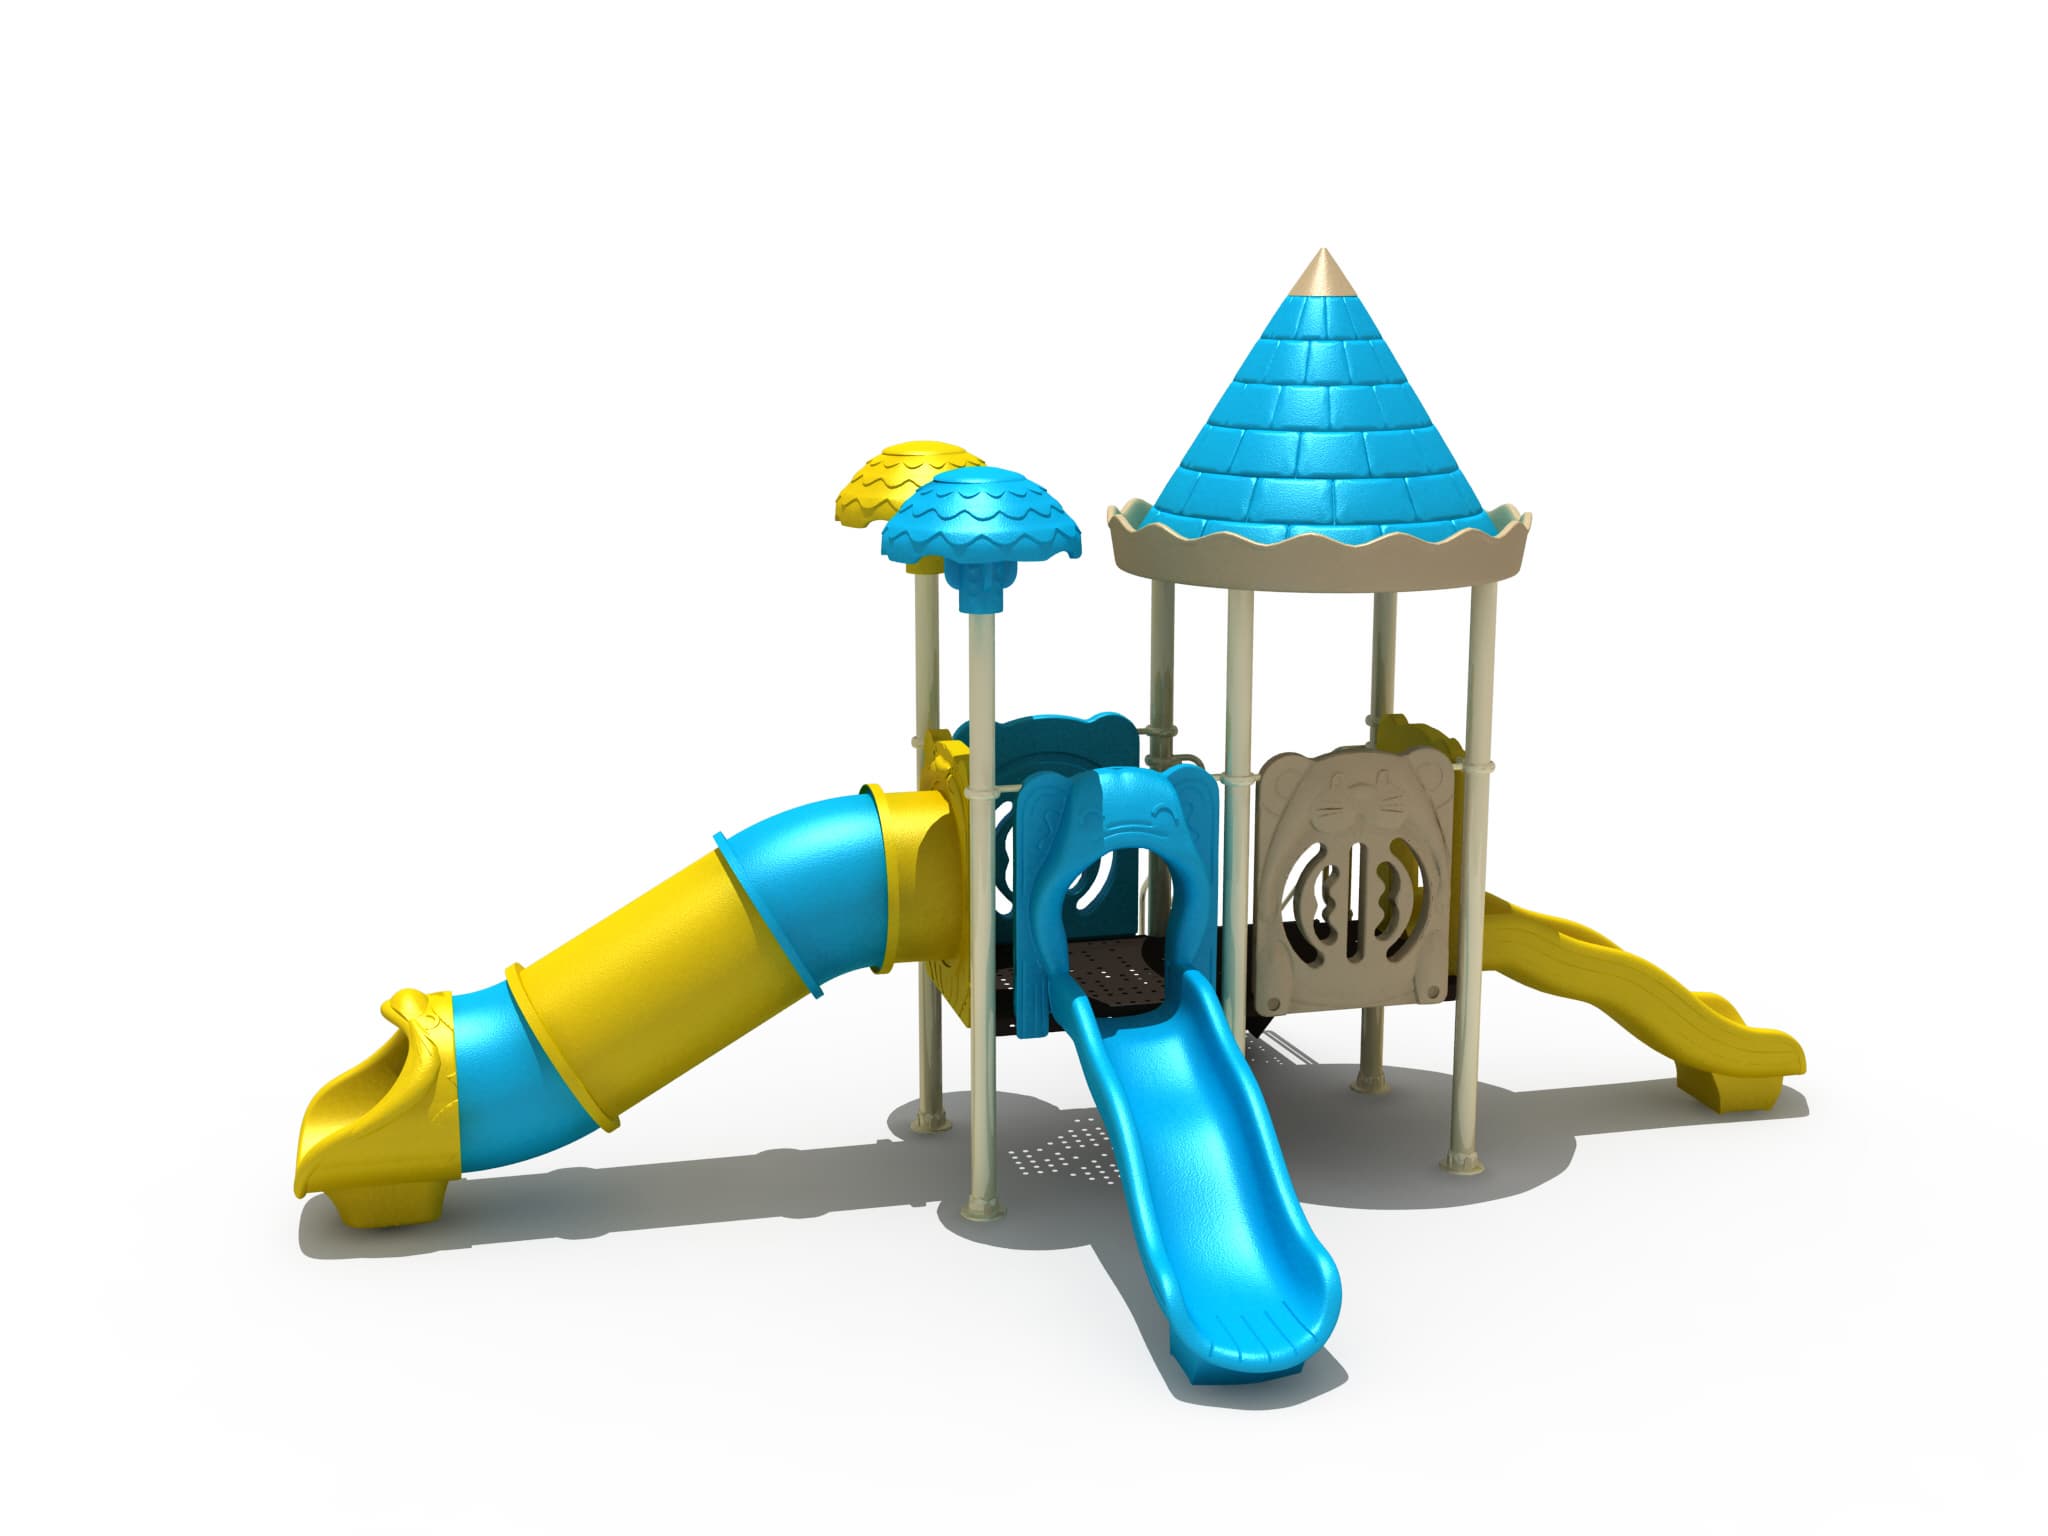 OUTDOOR PLAYGROUND FACILITY